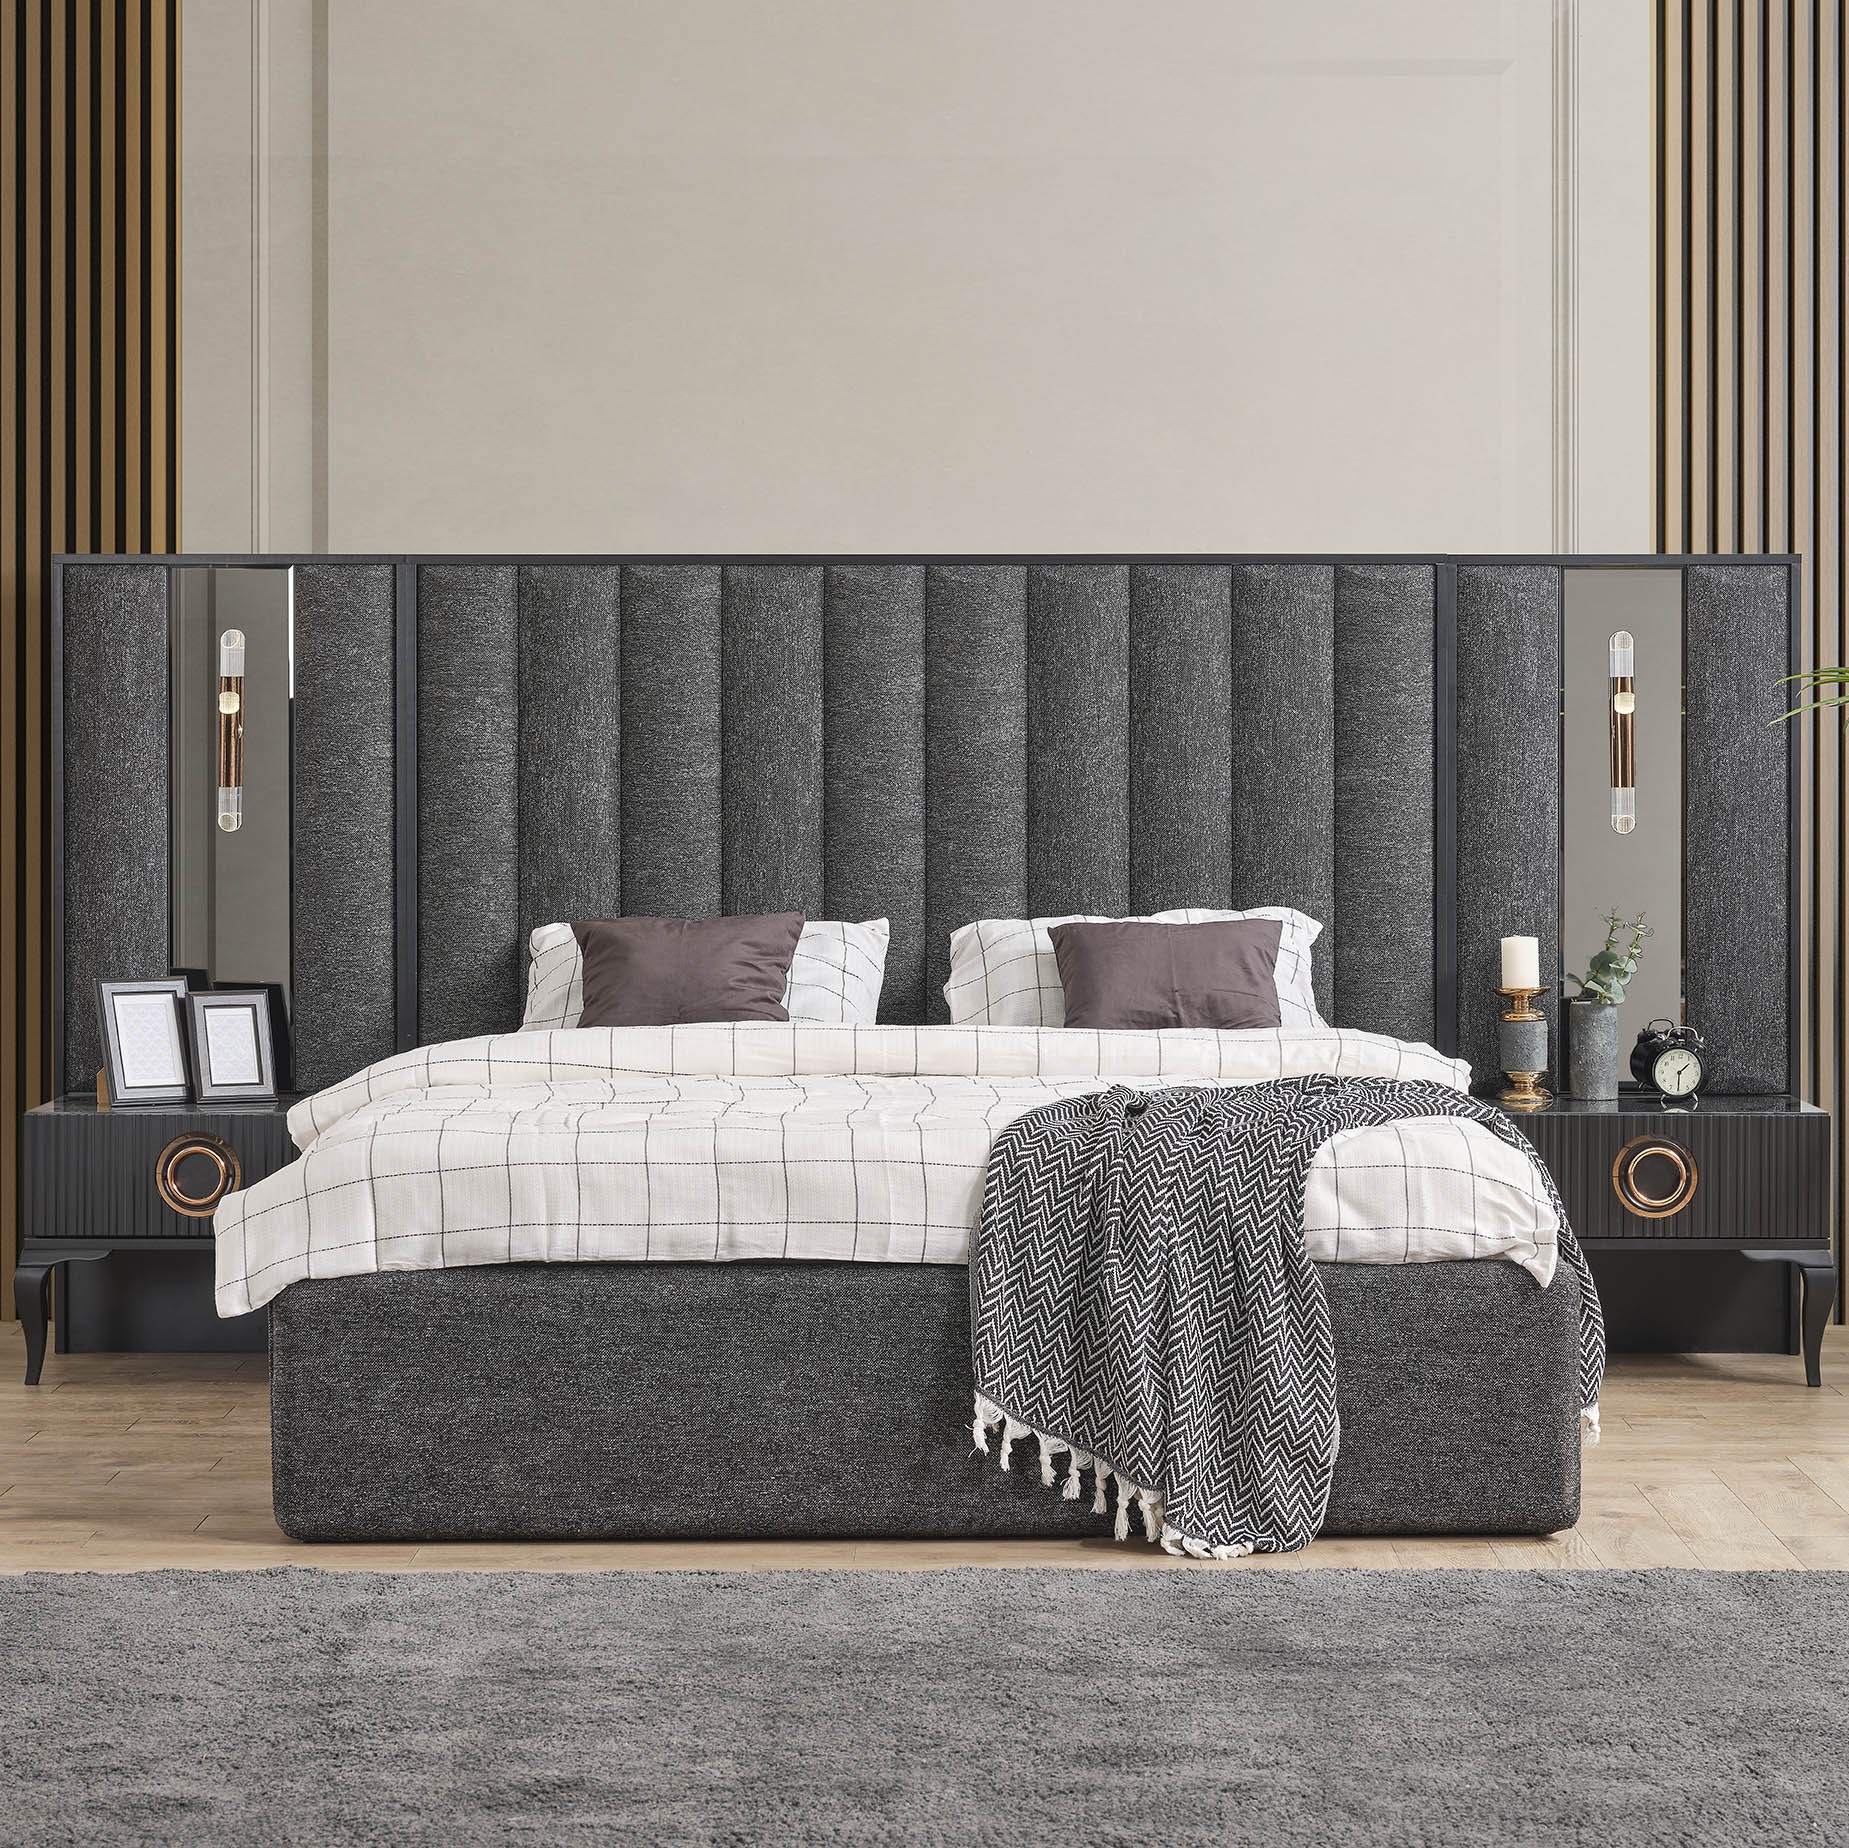 Style Larissa Vol2 Bed Without Storage 180x200 cm